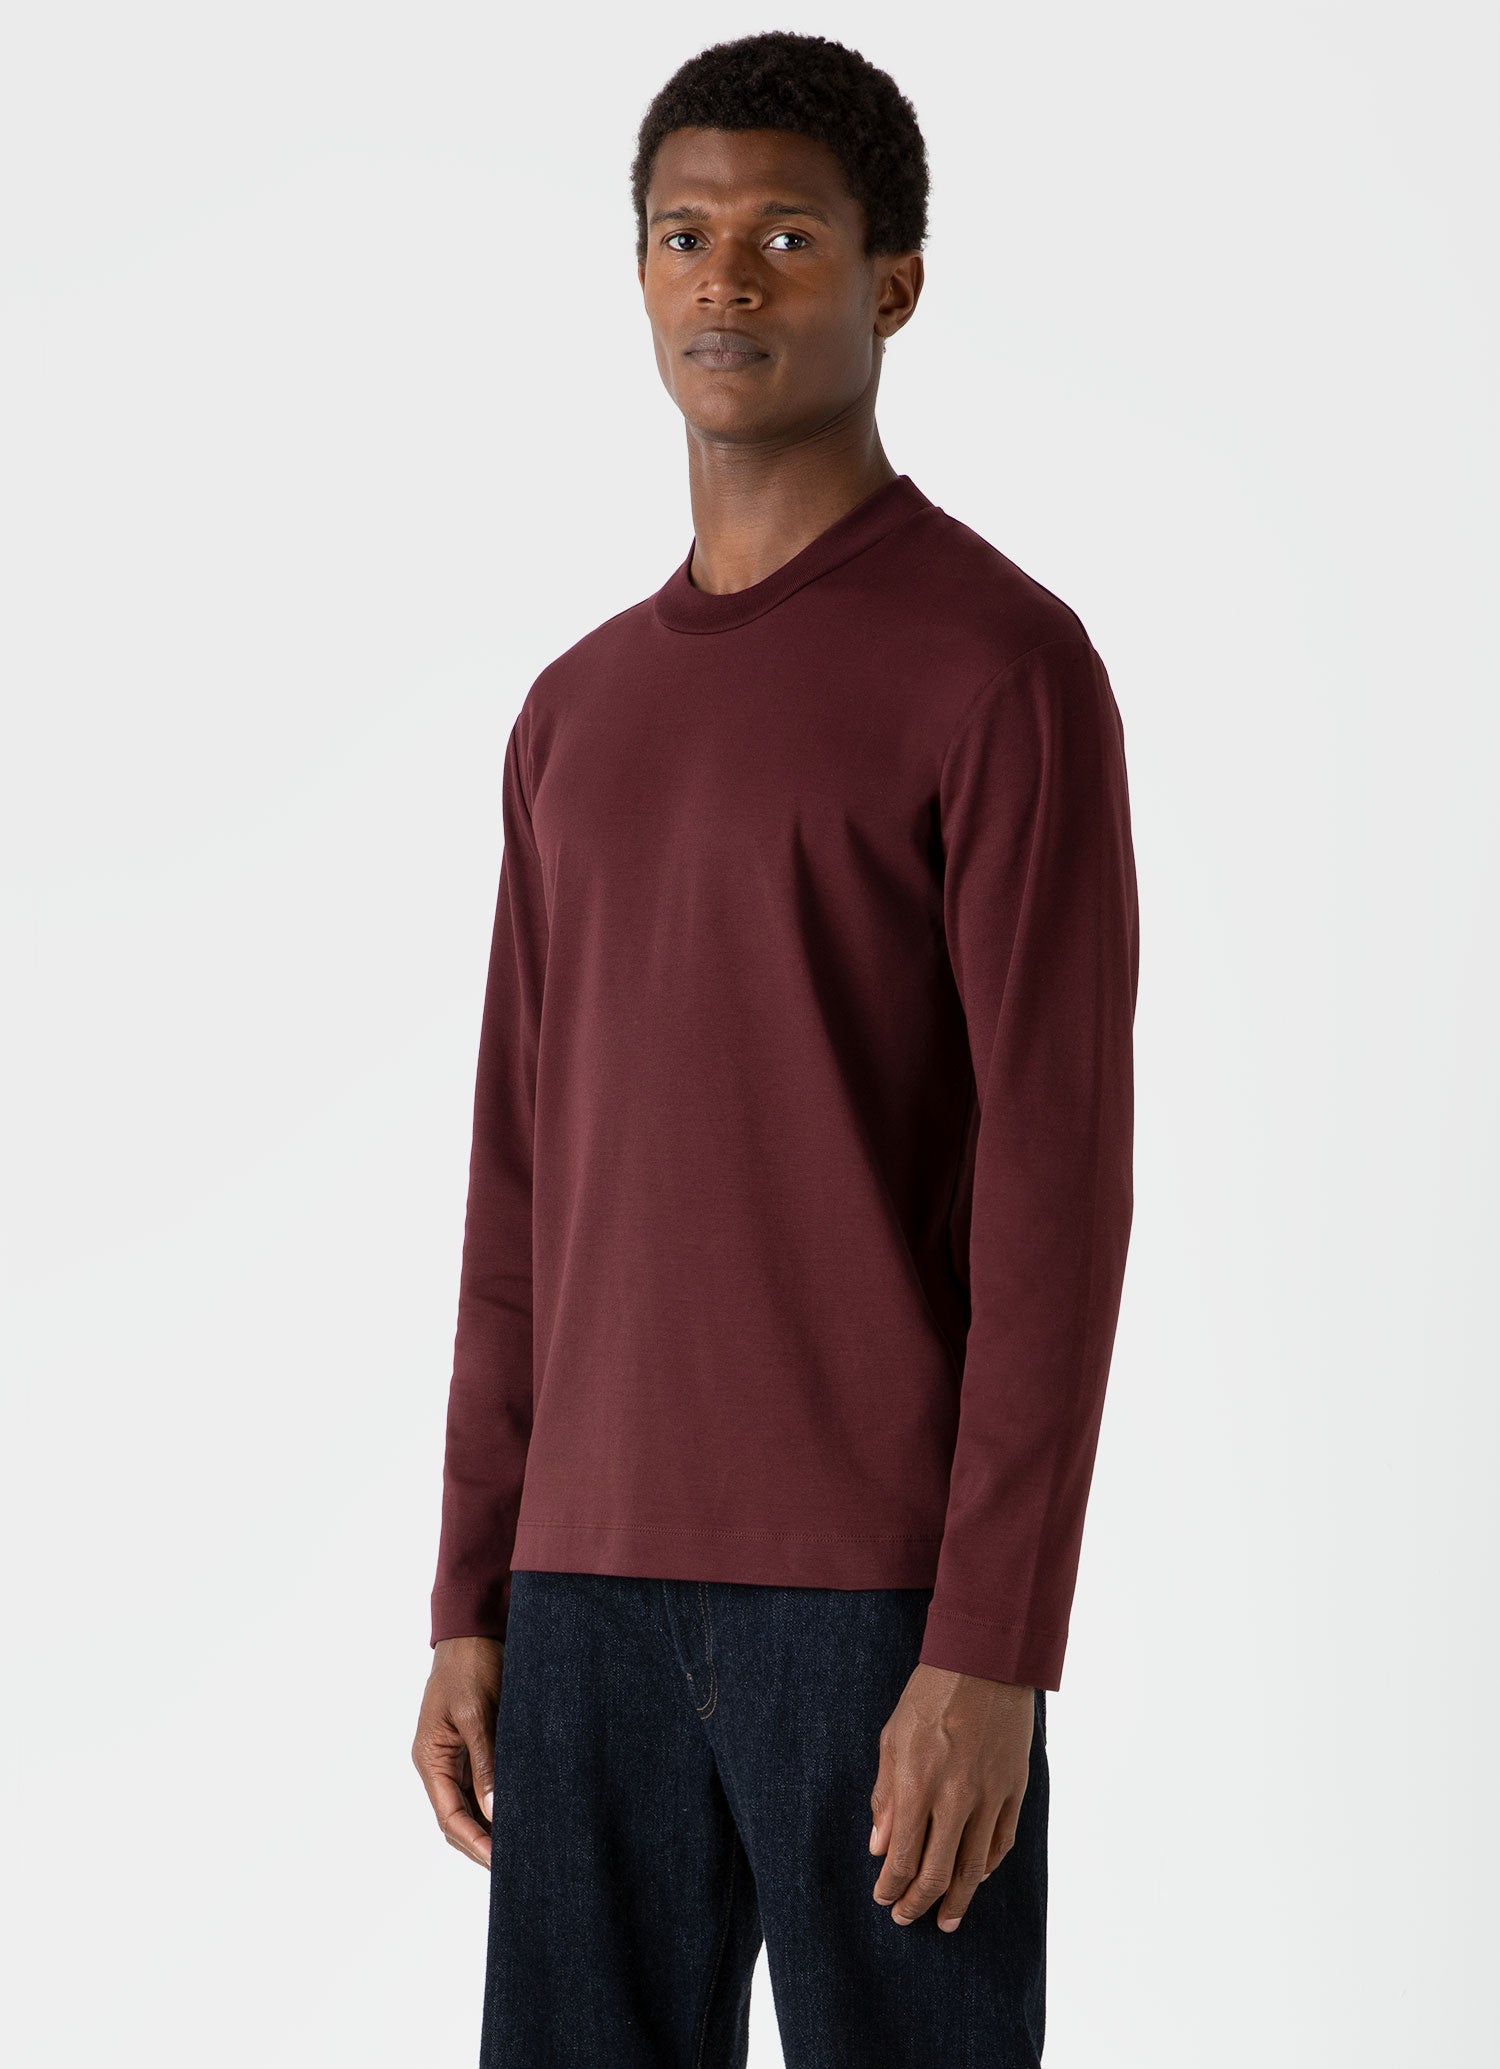 Men's Brushed Cotton Long Sleeve T-shirt in Maroon